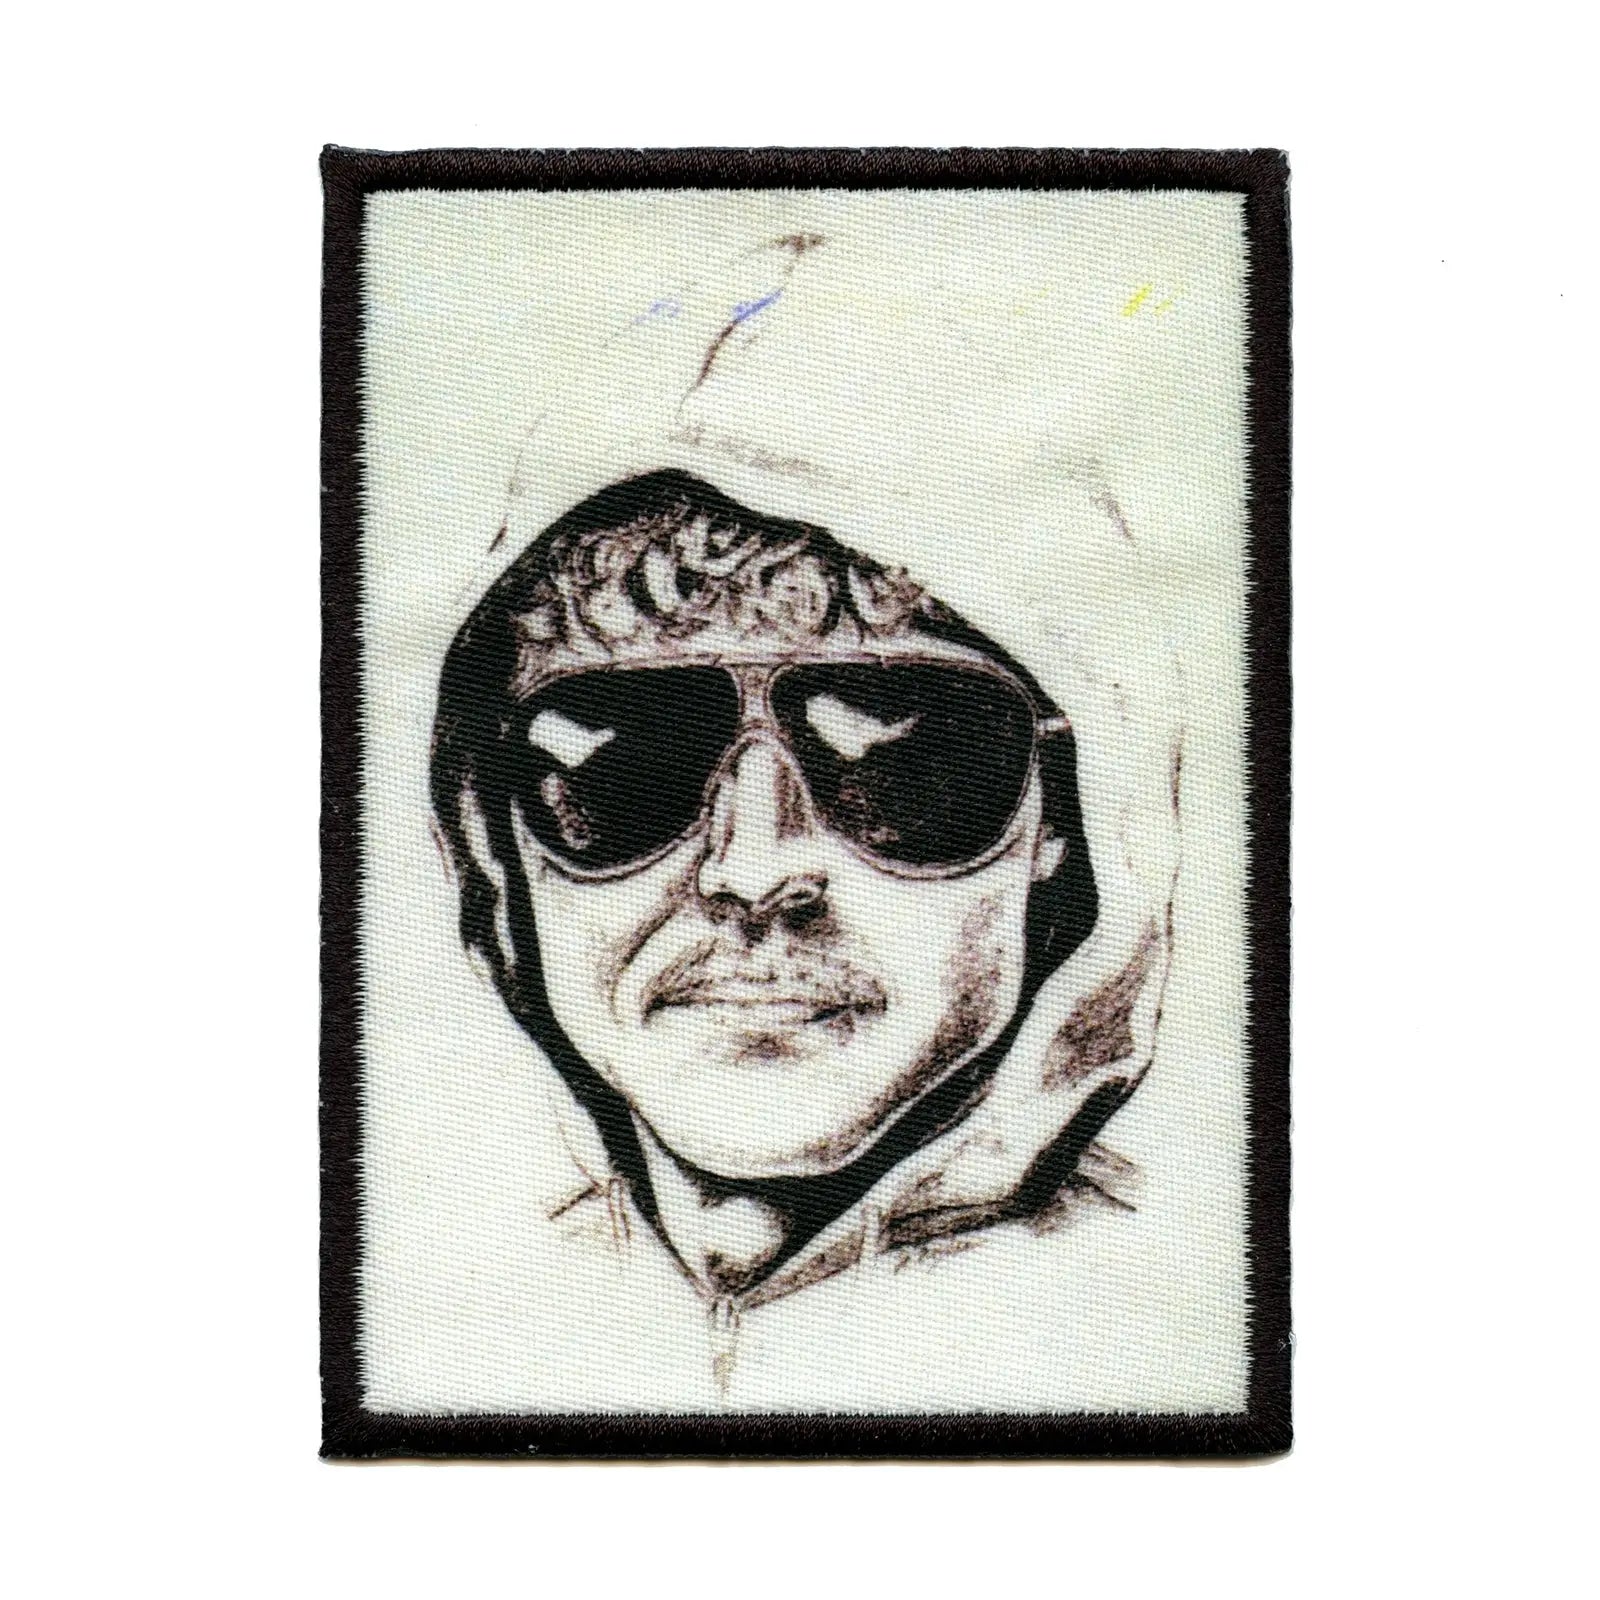 Uni Bomber Police Sketch Embroidered Iron On Foto Patch 